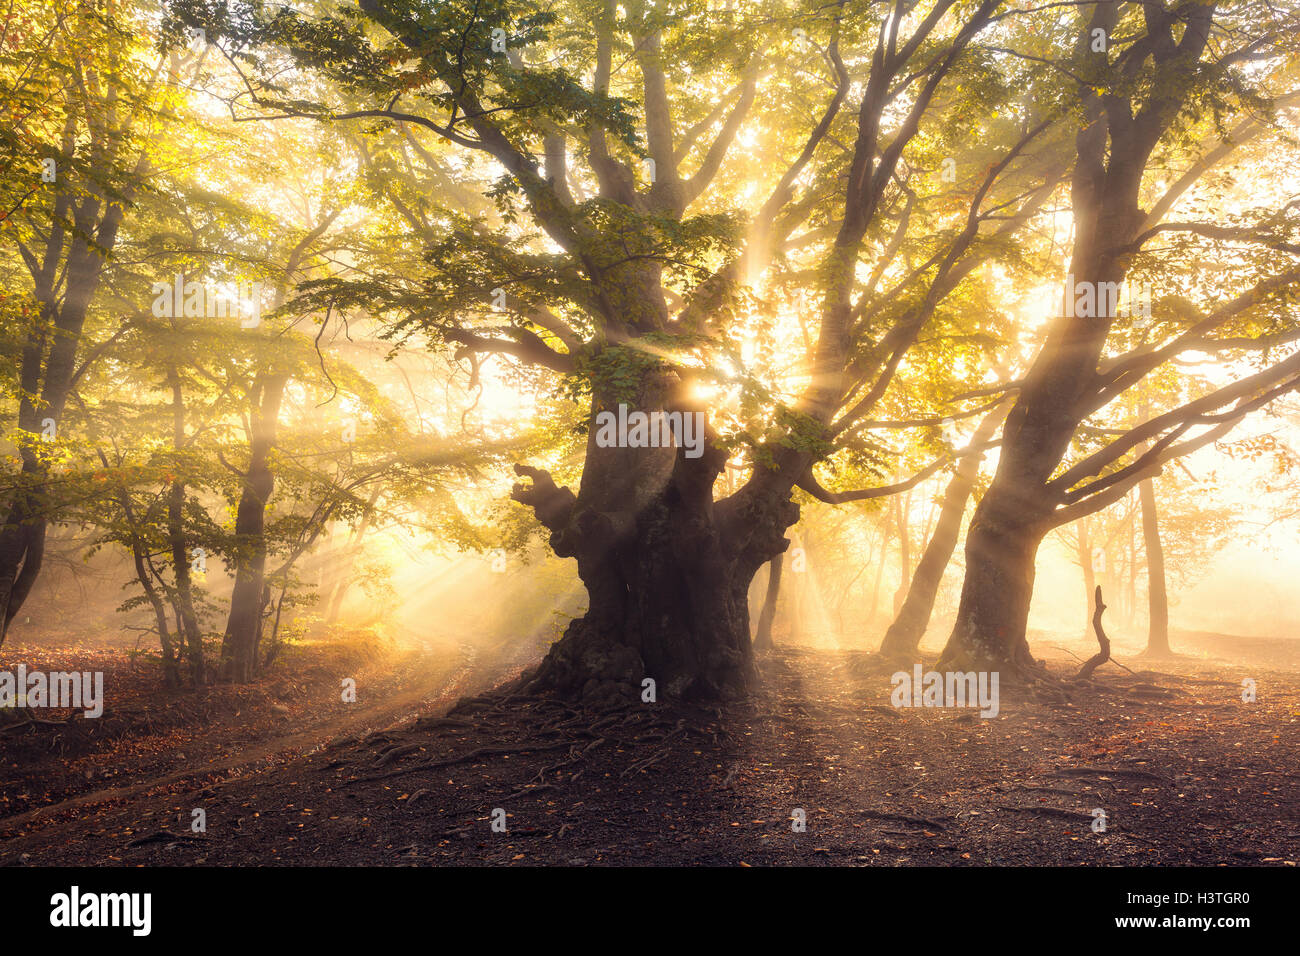 Magical old tree with sun rays in the morning. Forest in fog. Colorful landscape with foggy forest, gold sunlight, green leaves Stock Photo